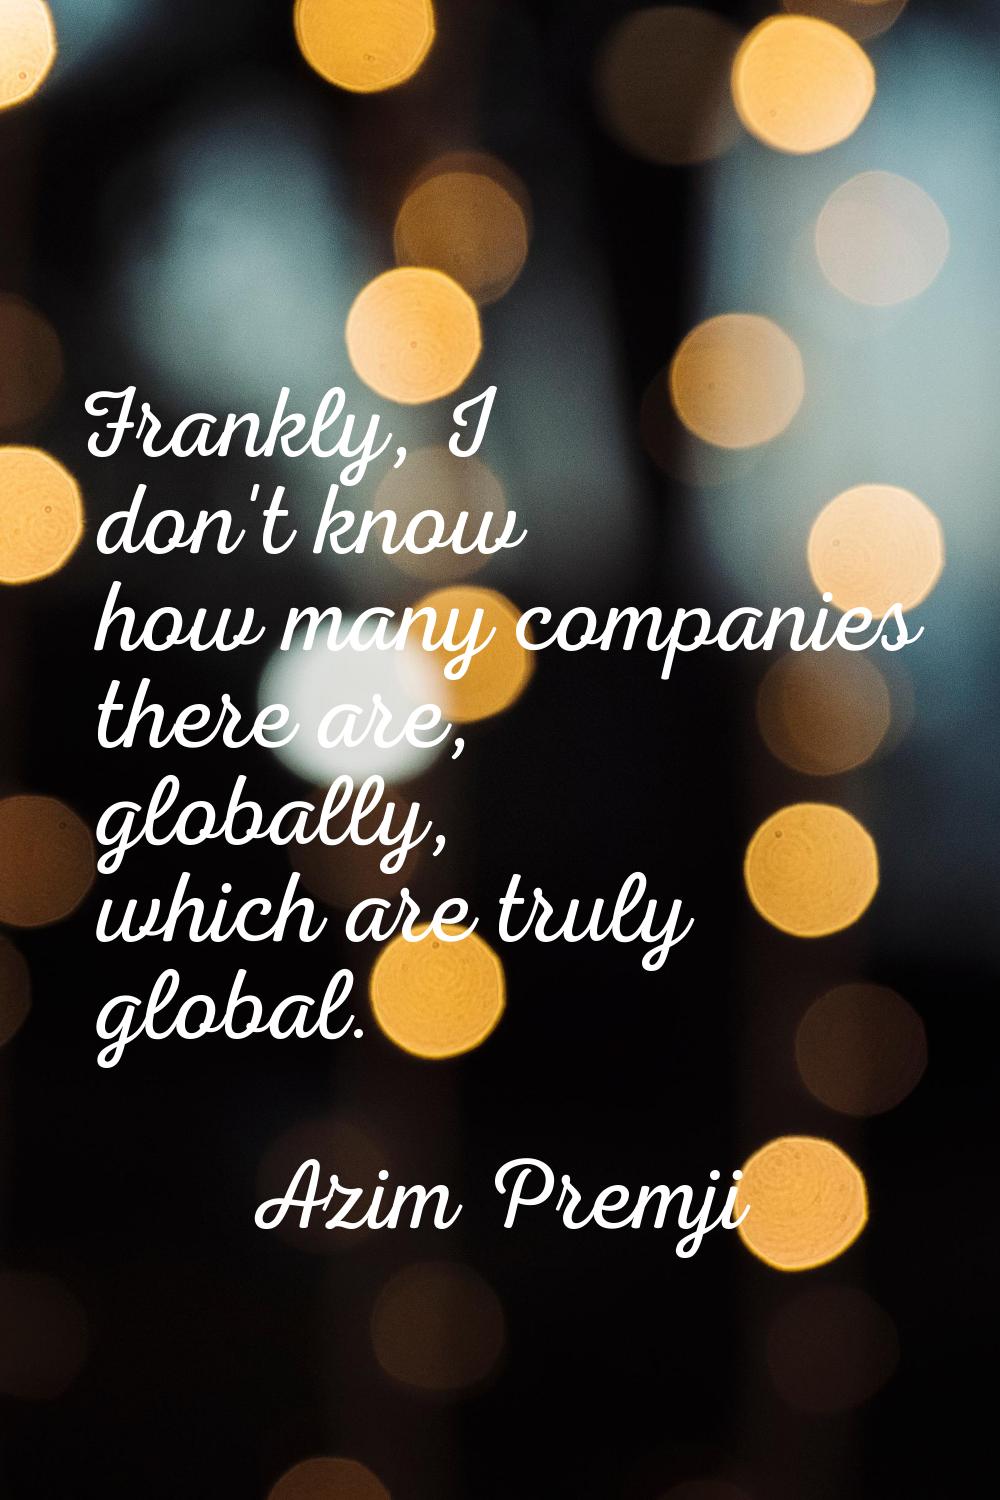 Frankly, I don't know how many companies there are, globally, which are truly global.